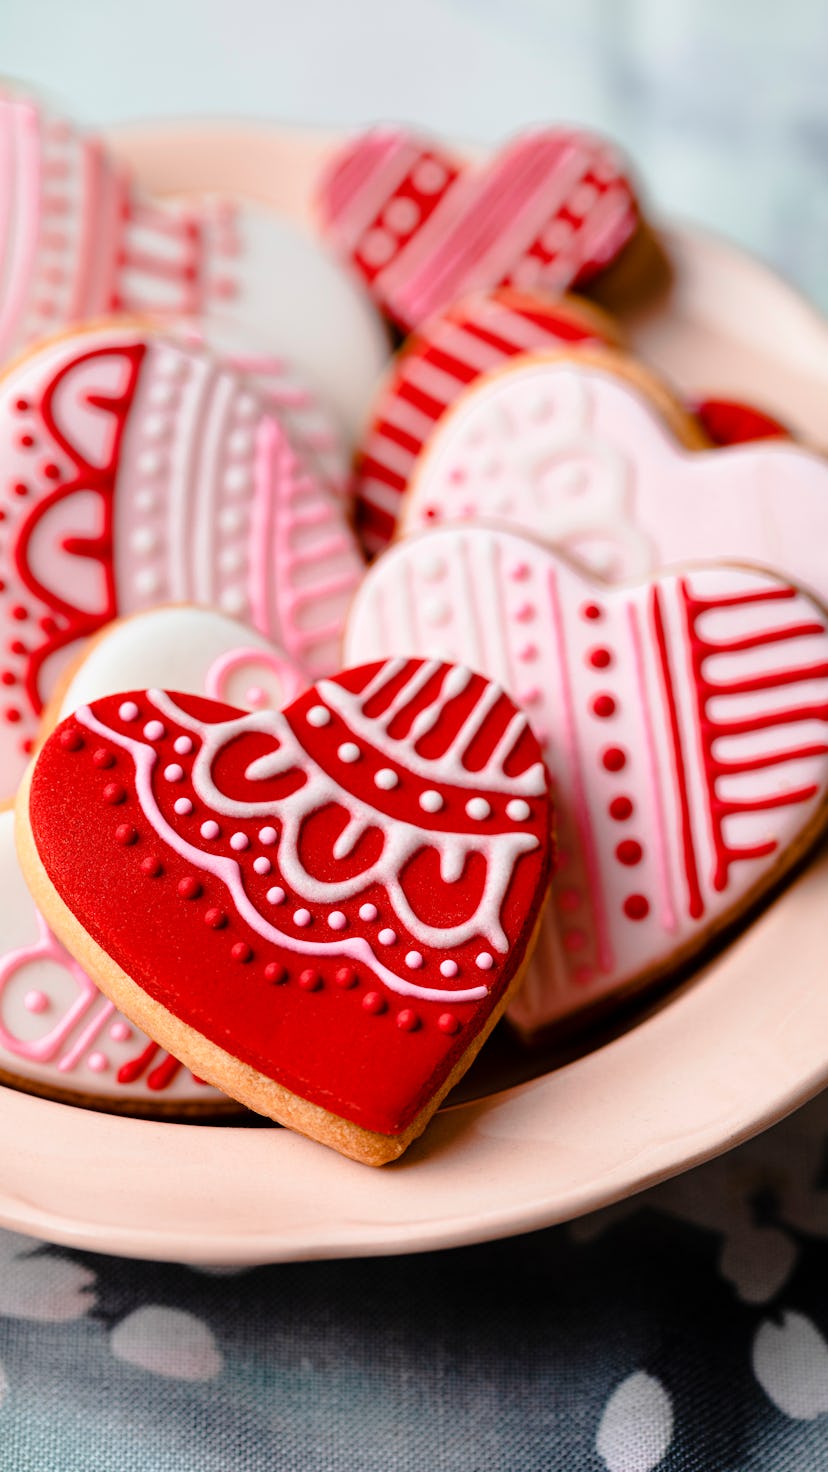 Heart-shaped decorated cookies for tea, studio shot.